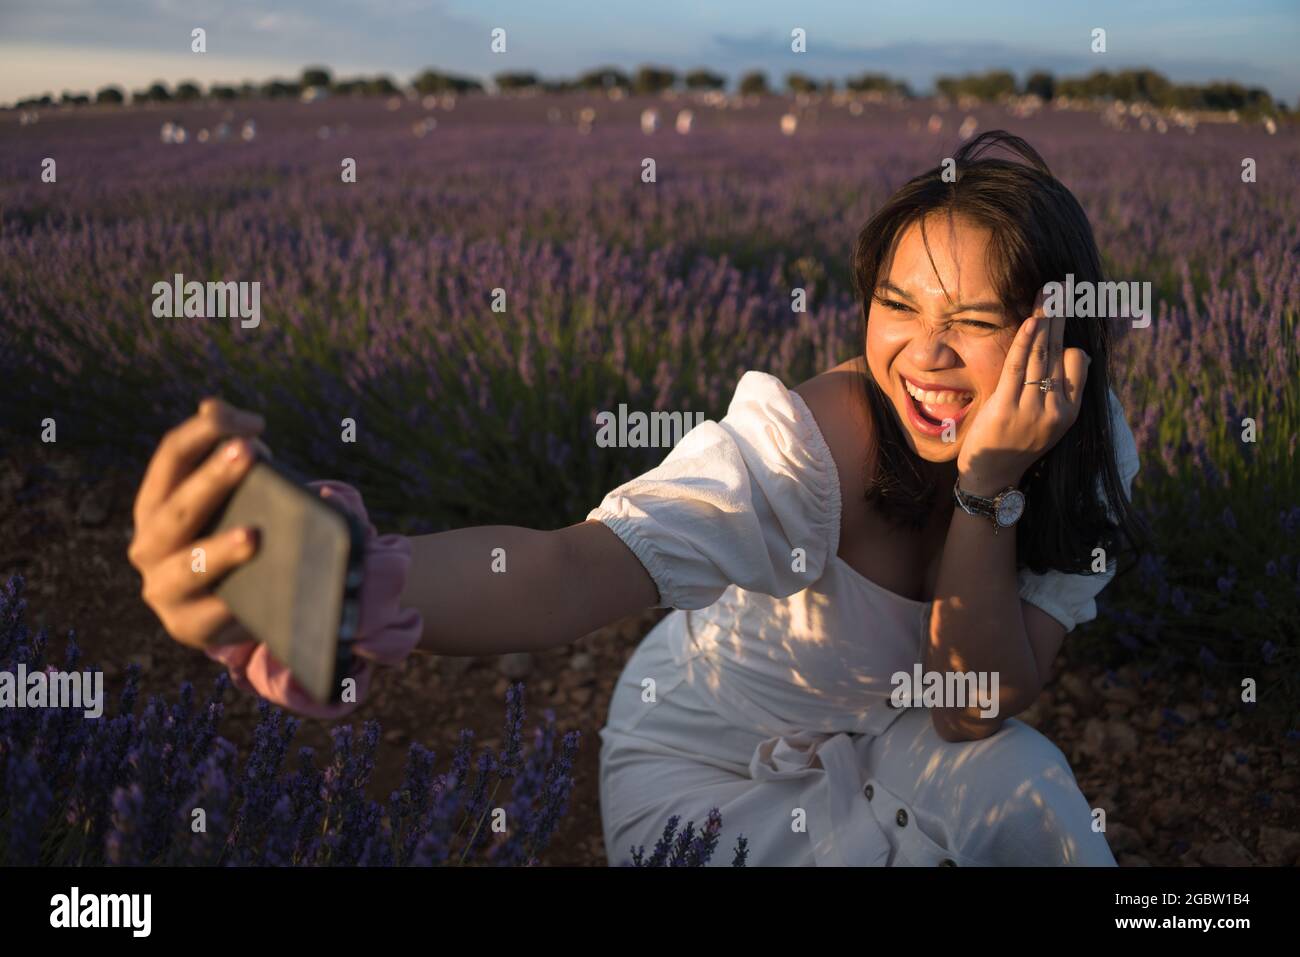 outdoors romantic portrait of young happy and attractive woman in white summer dress taking selfie with mobile phone at beautiful lavender flowers fie Stock Photo